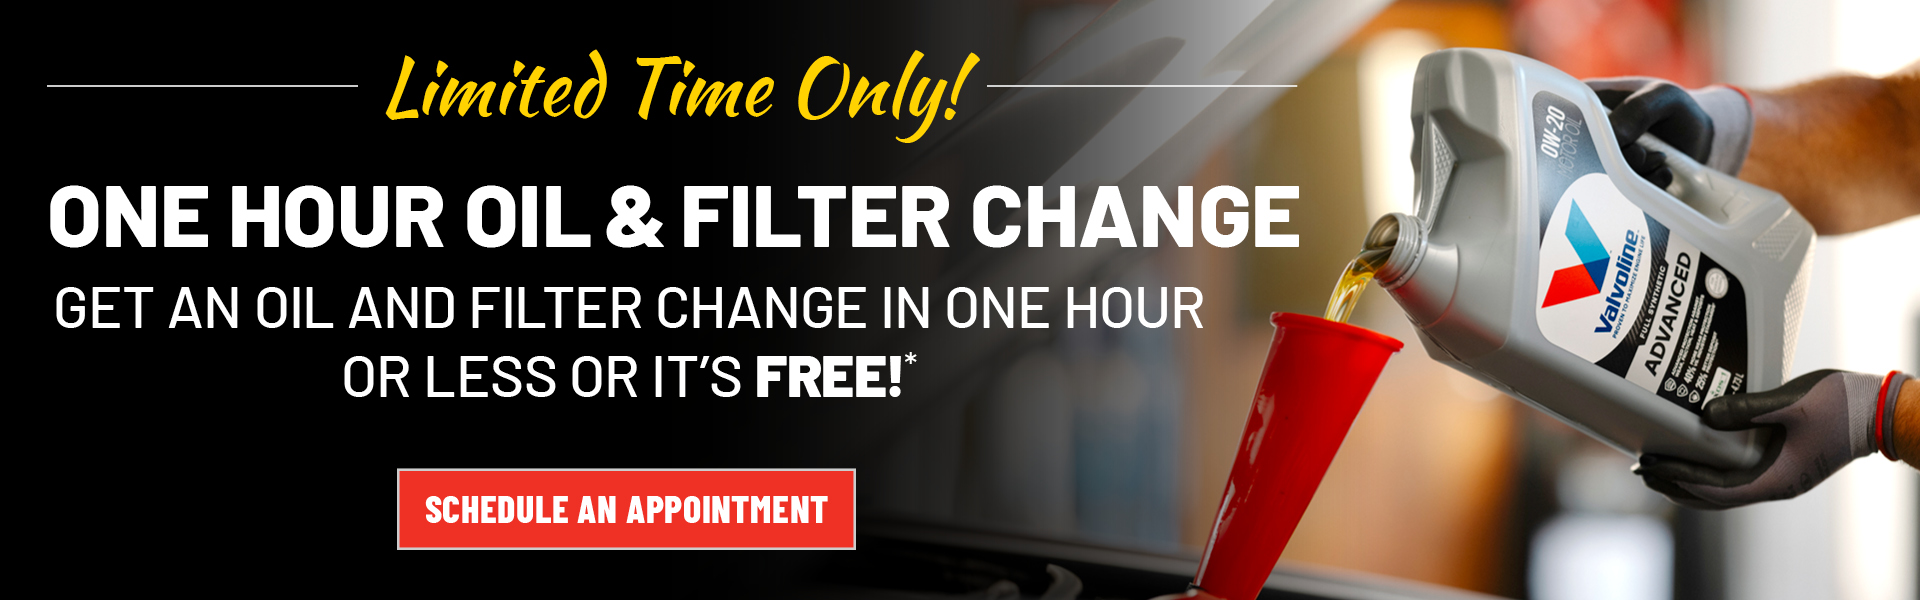 One hour or less oil change